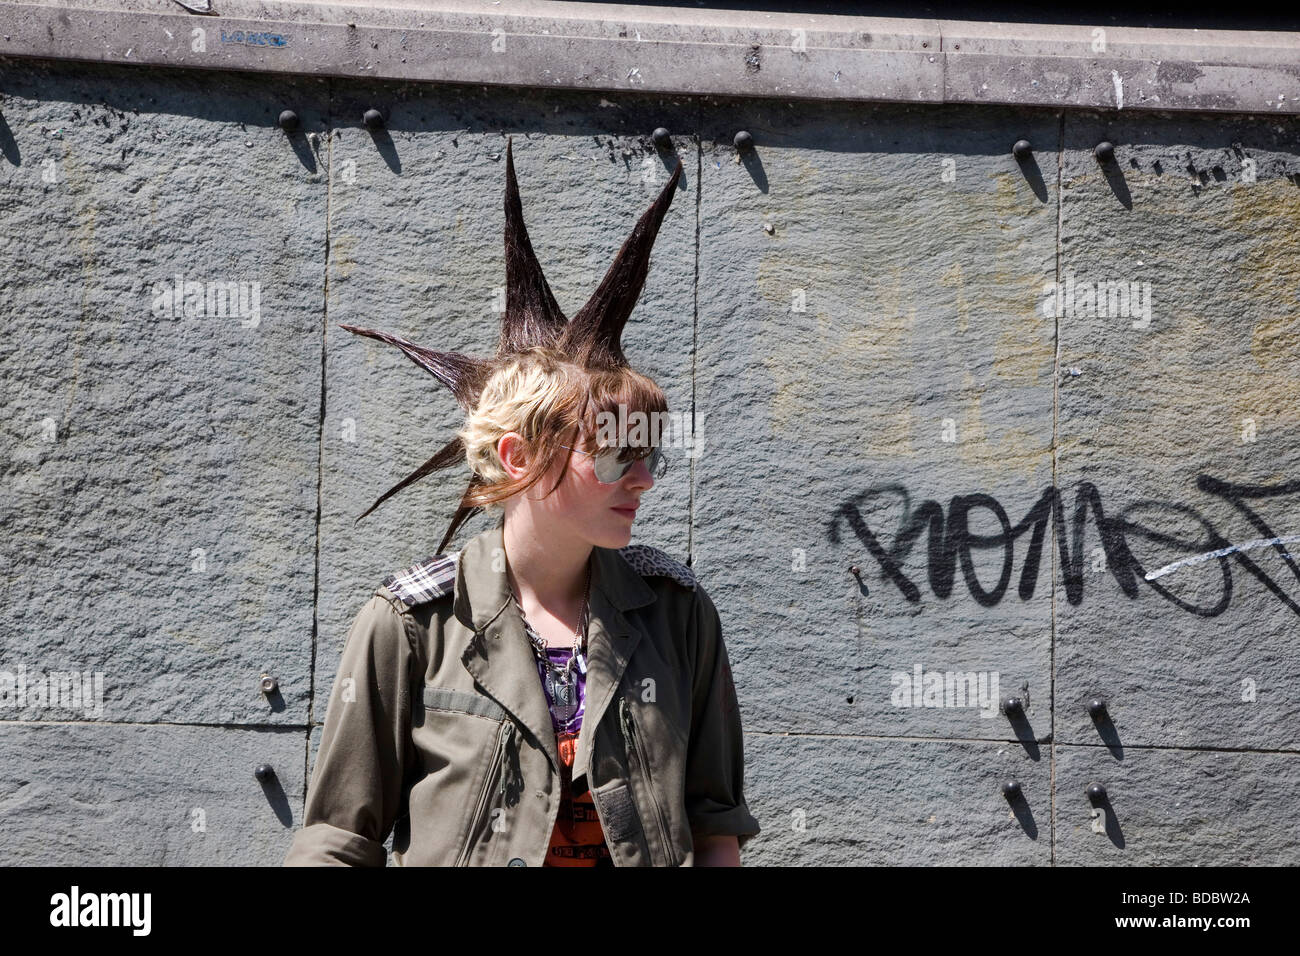 A punk girl with a large mohican, London, UK 2009 Stock Photo